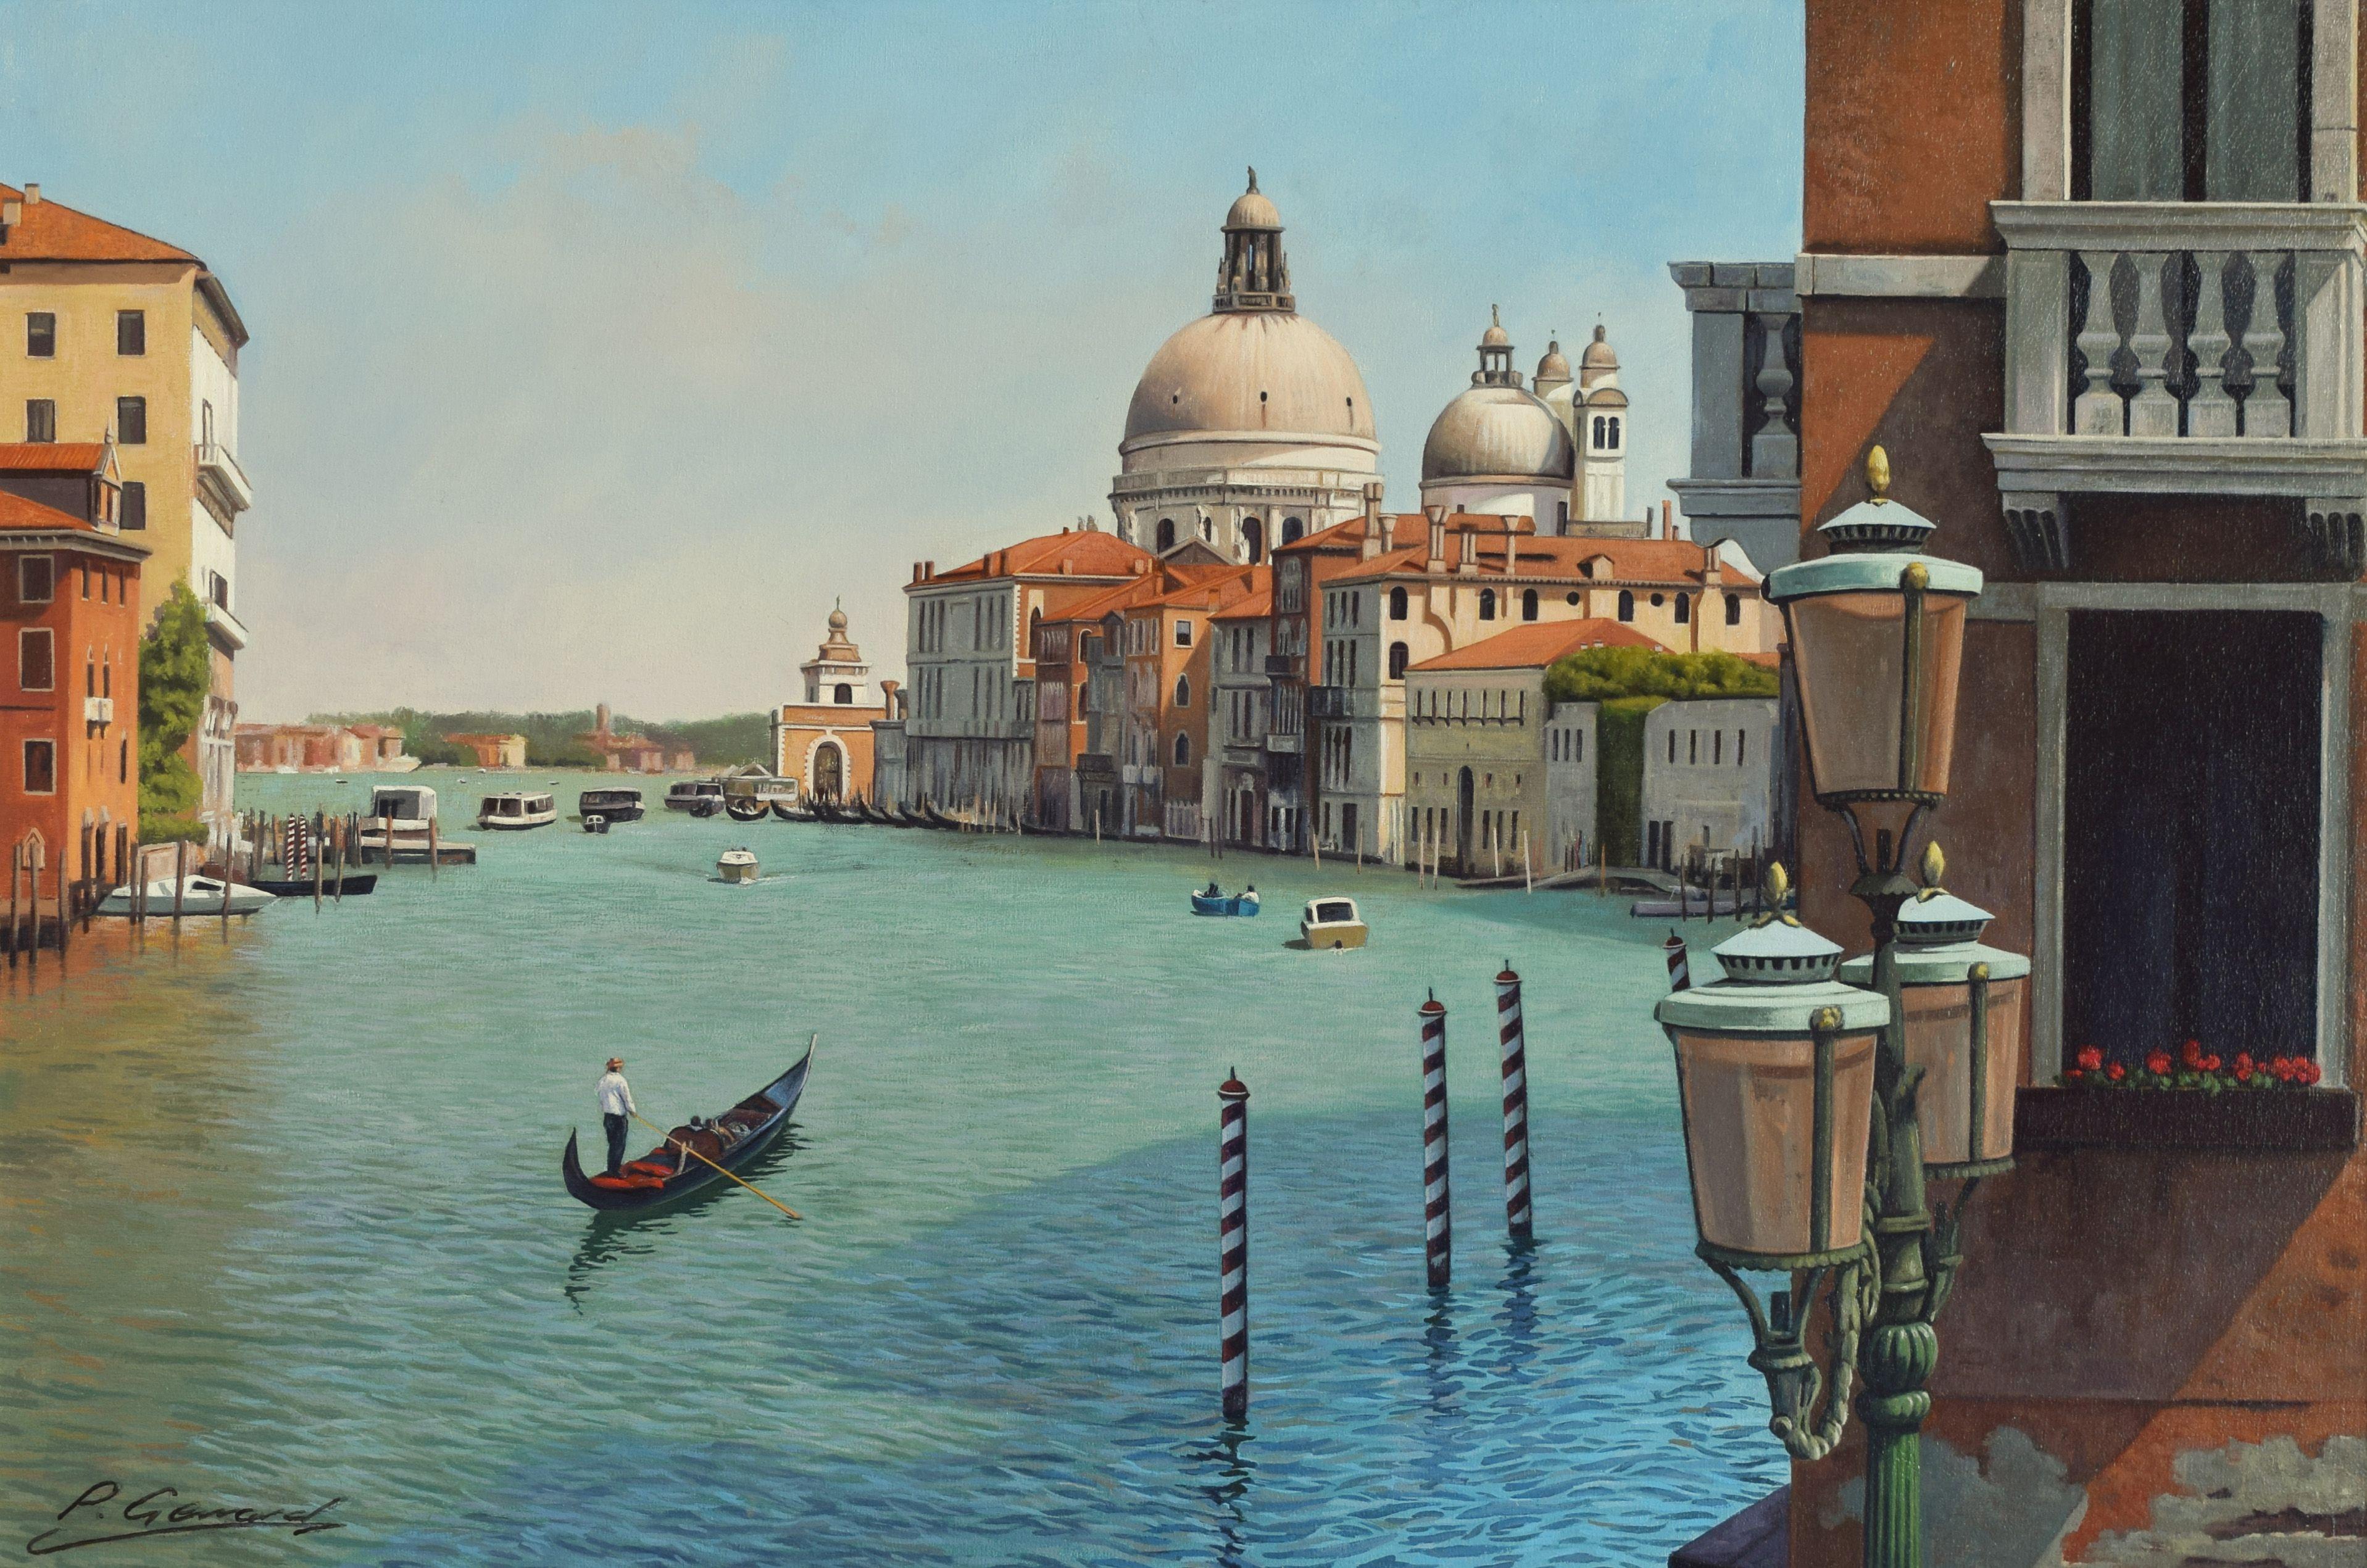 This iconic view of the Grand Canal from the Accademia Bridge is alive with light and colour. The cool hues in the water are the perfect foil for the warm colours in the buildings which are minutely observed and recorded in the painting.  Oil paints